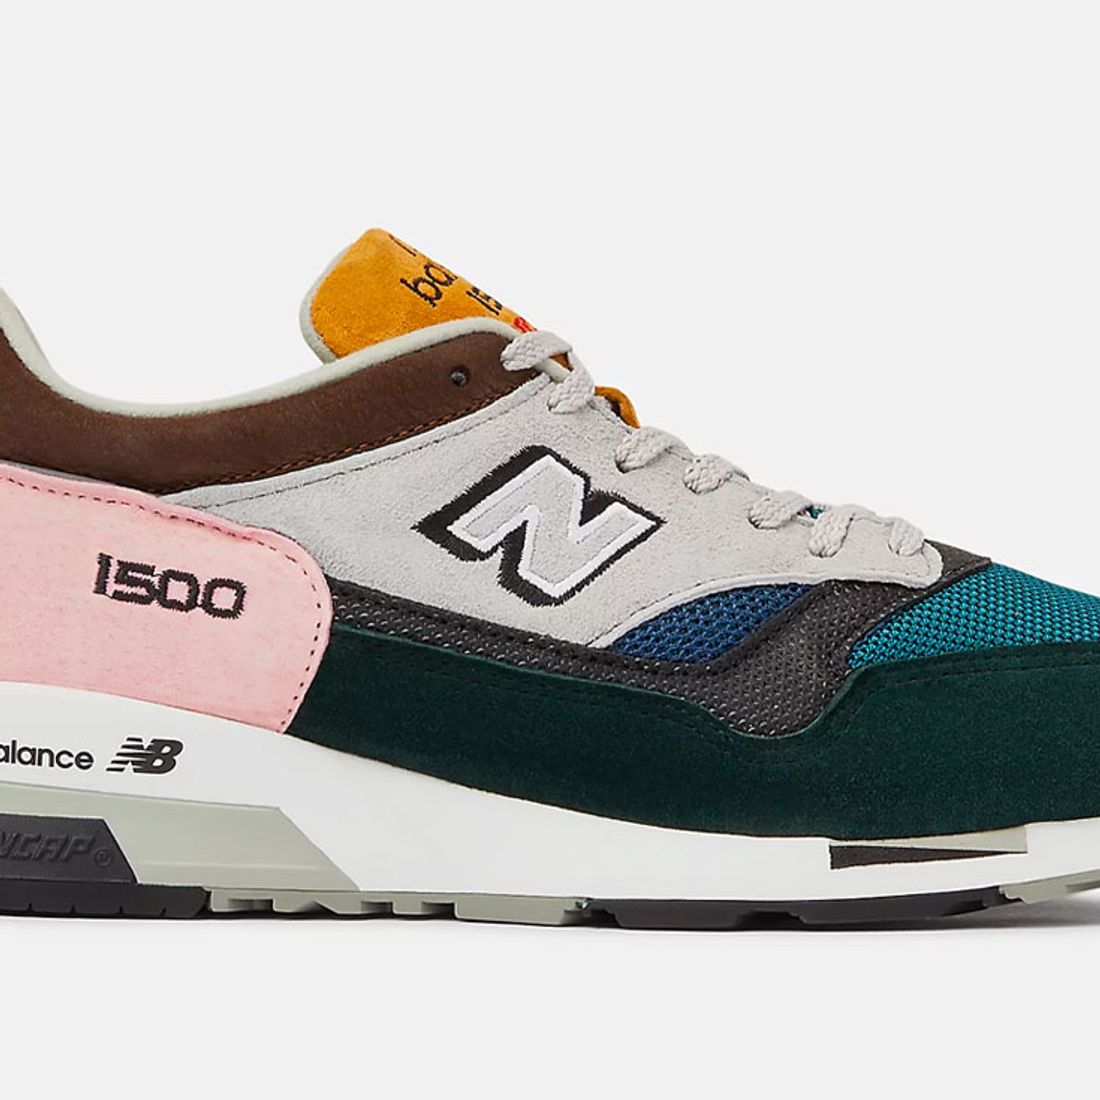 Dicht Persona nietig Out Now: New Balance 1500 'Selected Edition' - Sneaker Freaker